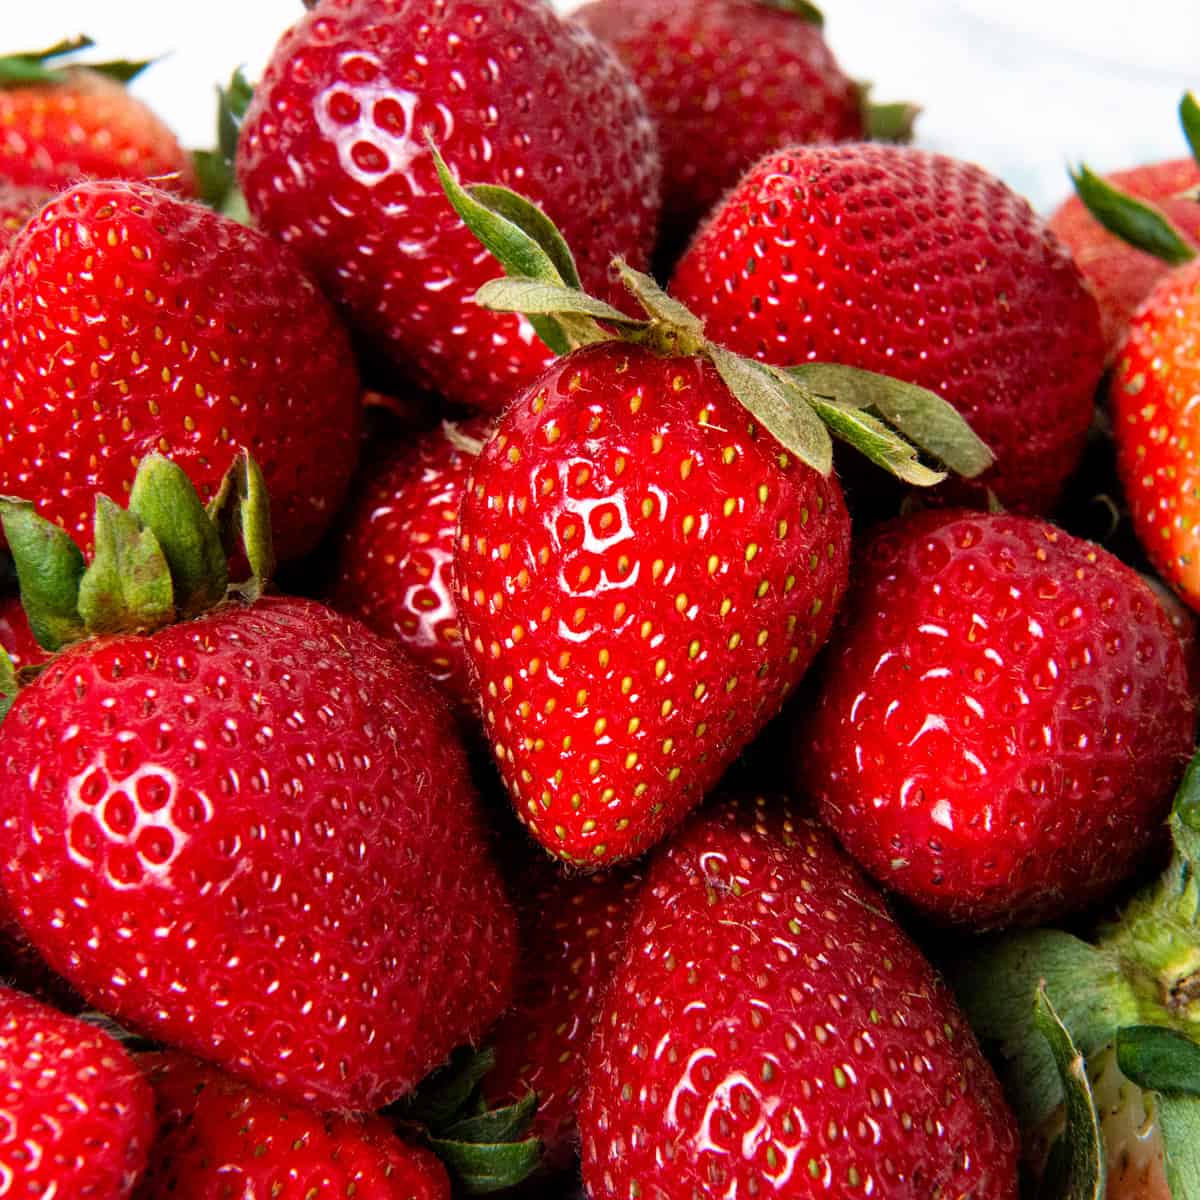 Up close image of a pile of strawberries.